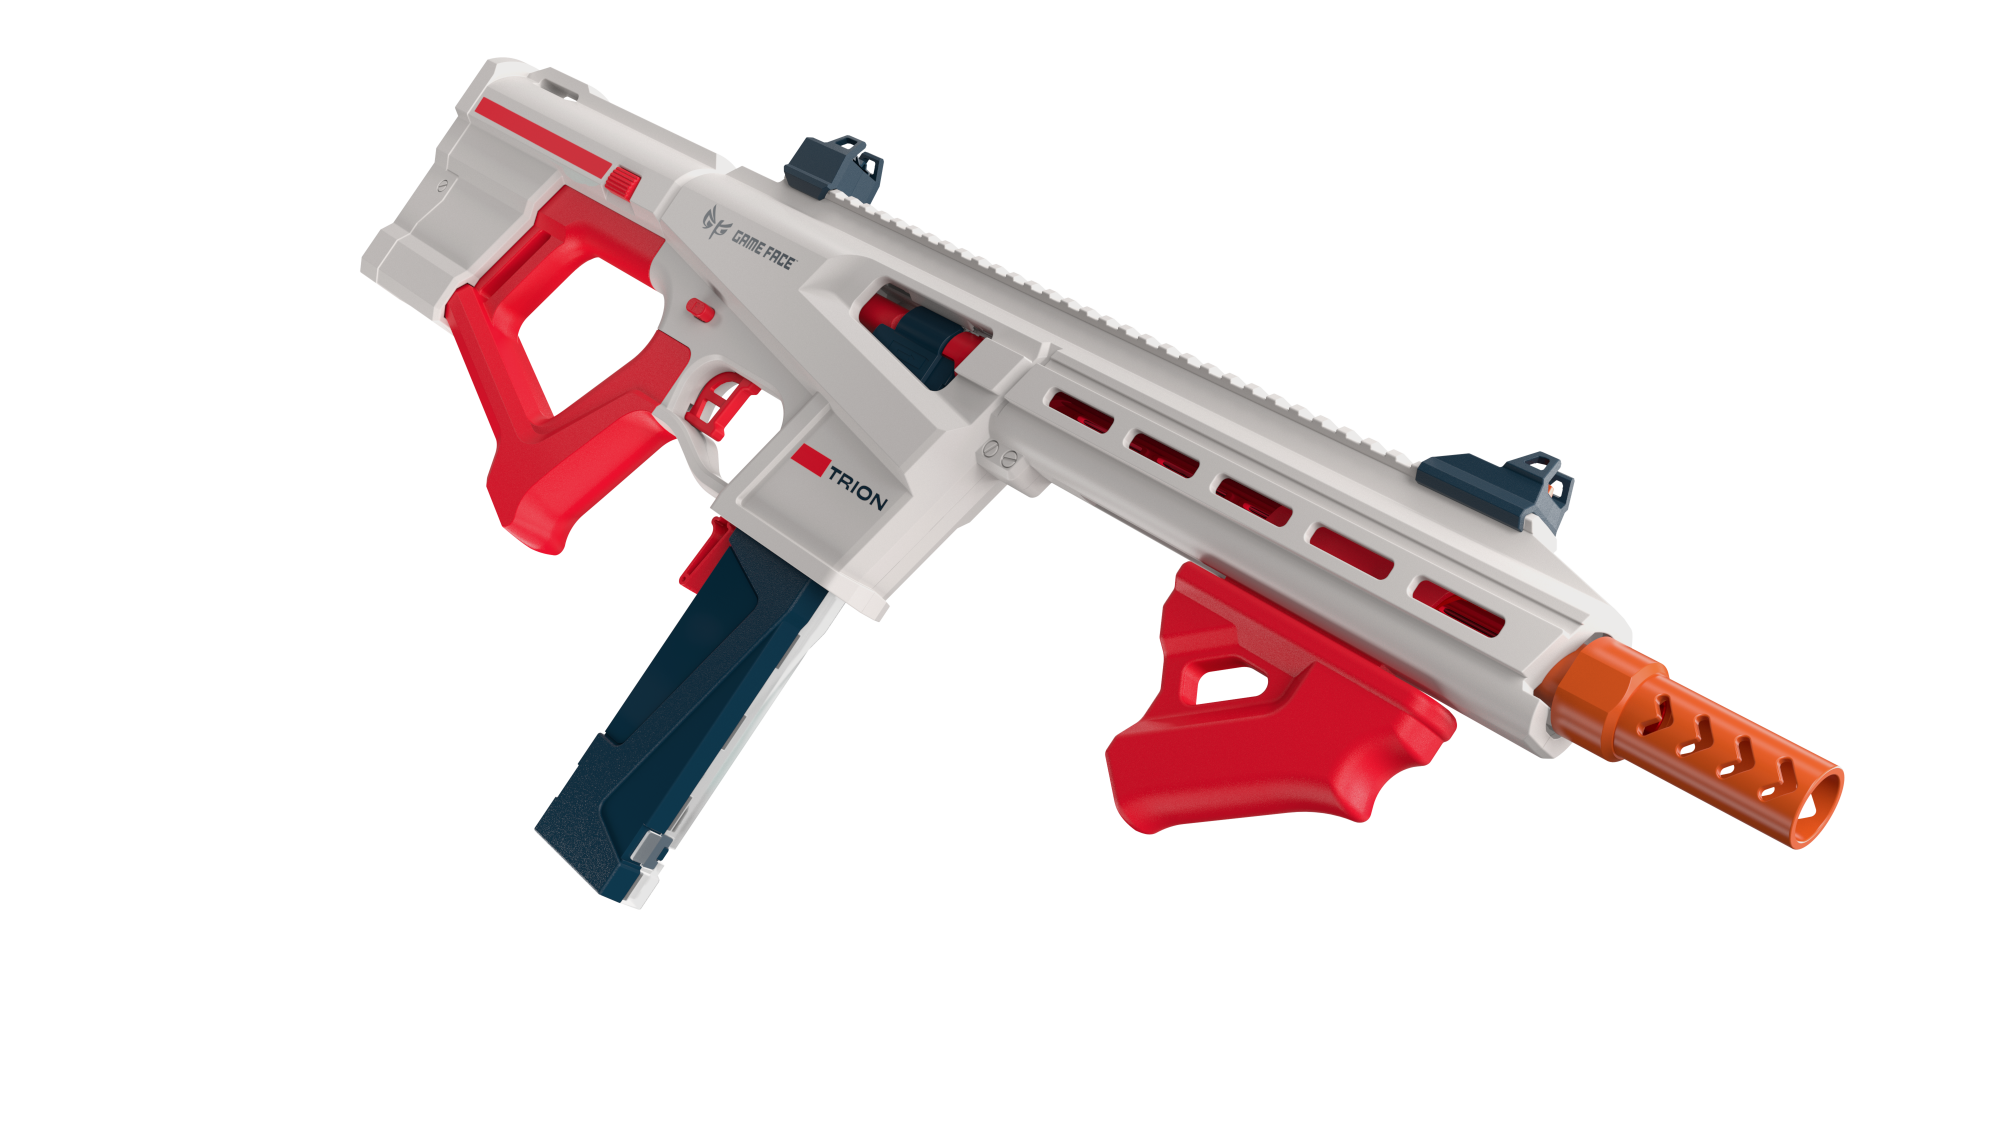 Game Face Trion Competition Foam Dart Blaster, up to 200 FPS, 15 Darts, Ages 14+, Red - image 5 of 9